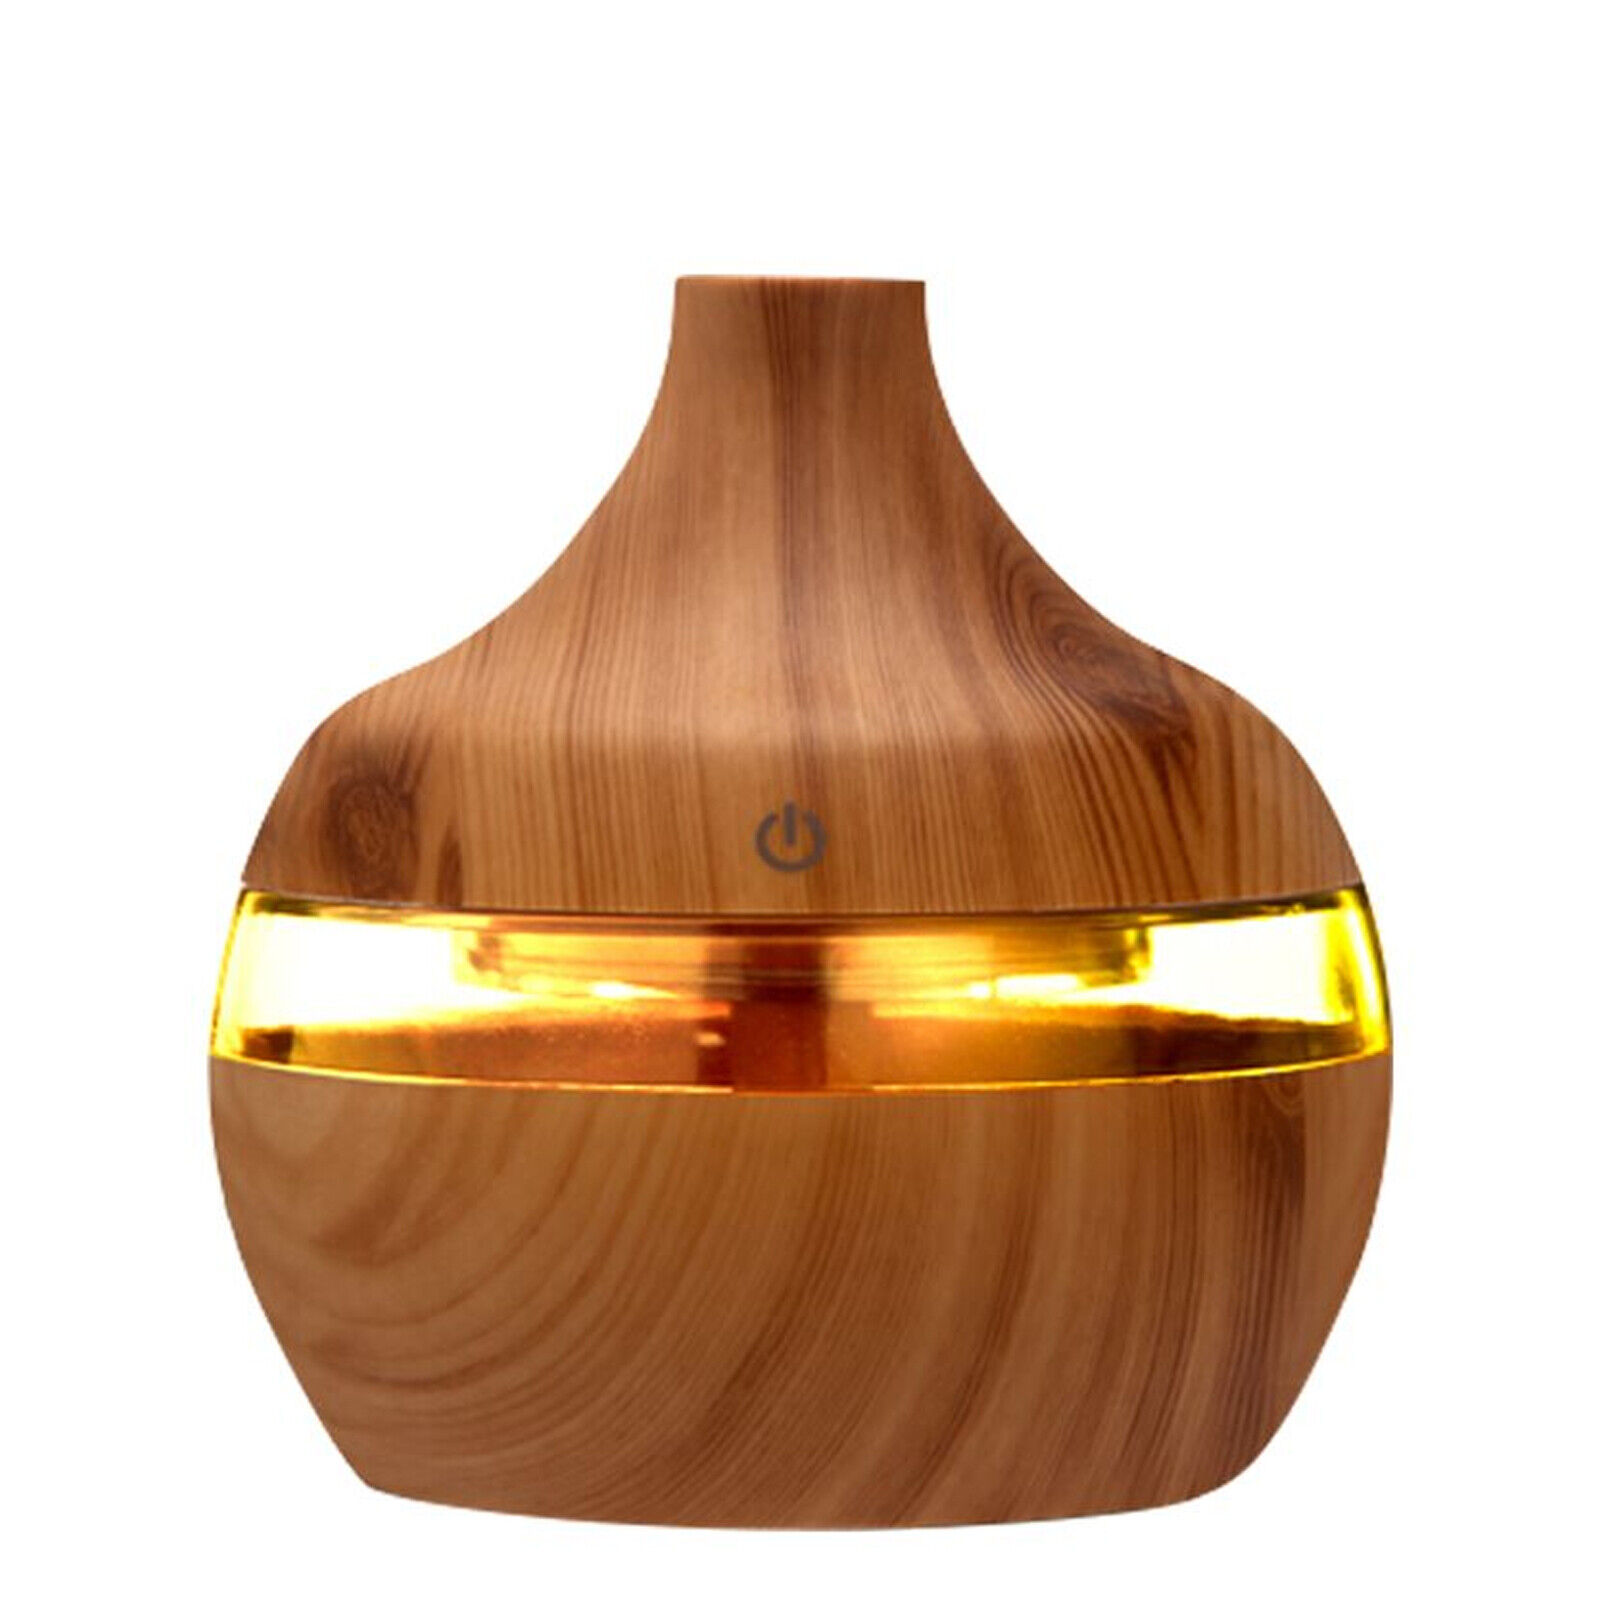 7 Colour Humidifier Yellow Housing LED Ultrasonic Room Humidifier Aroma Essential Oil Diffuser Air Purifier